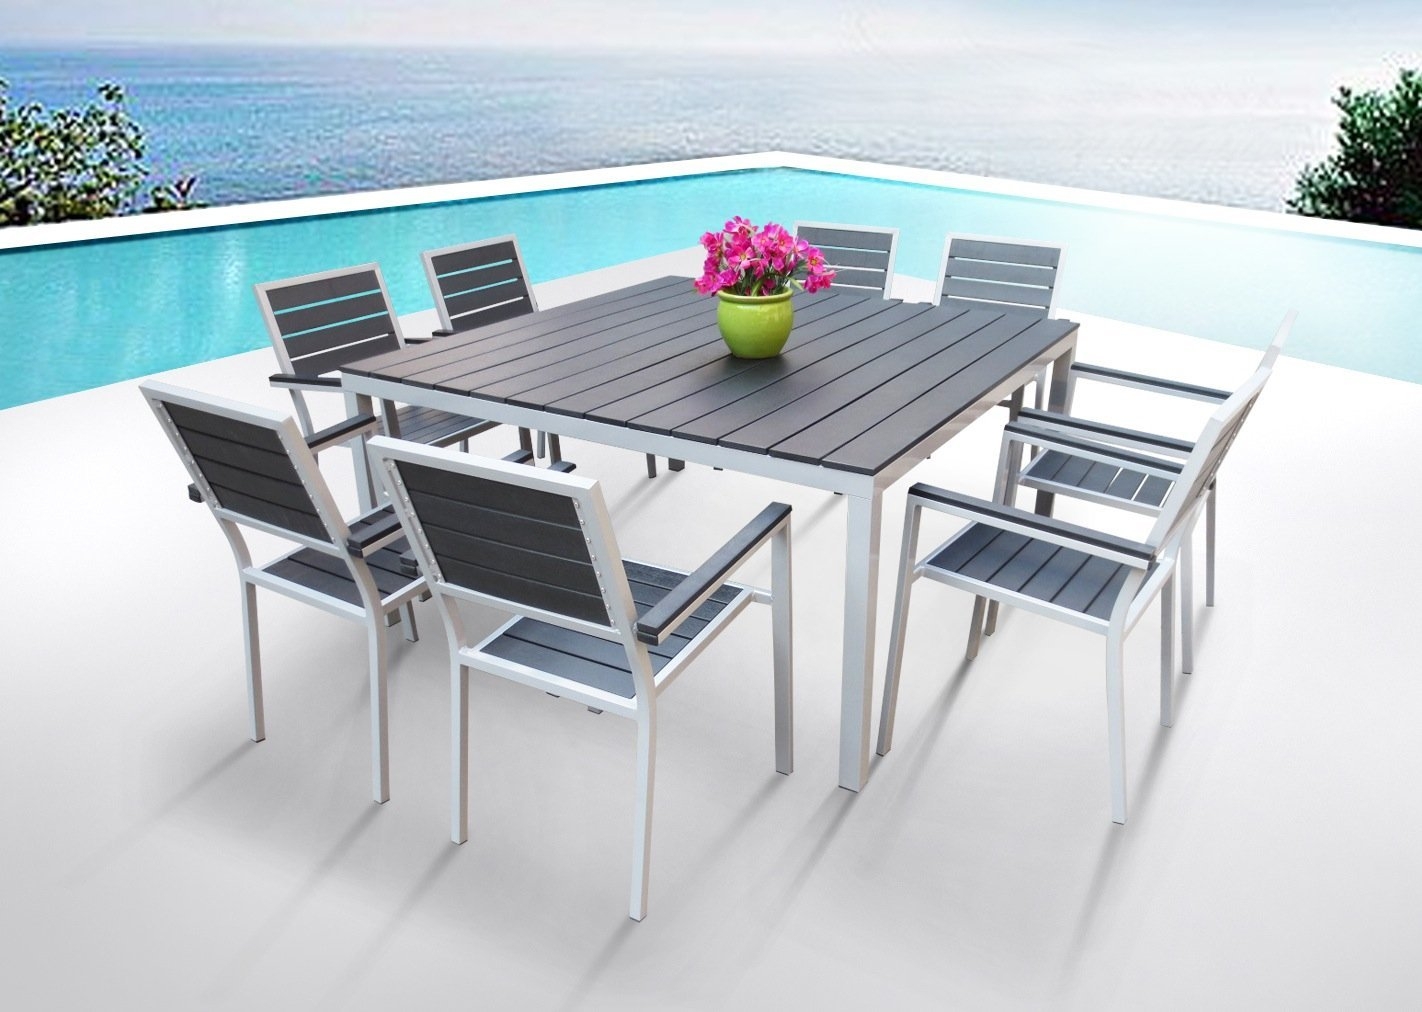 Outdoor Restaurant Furniture - Patio Tables, Chairs & Booths